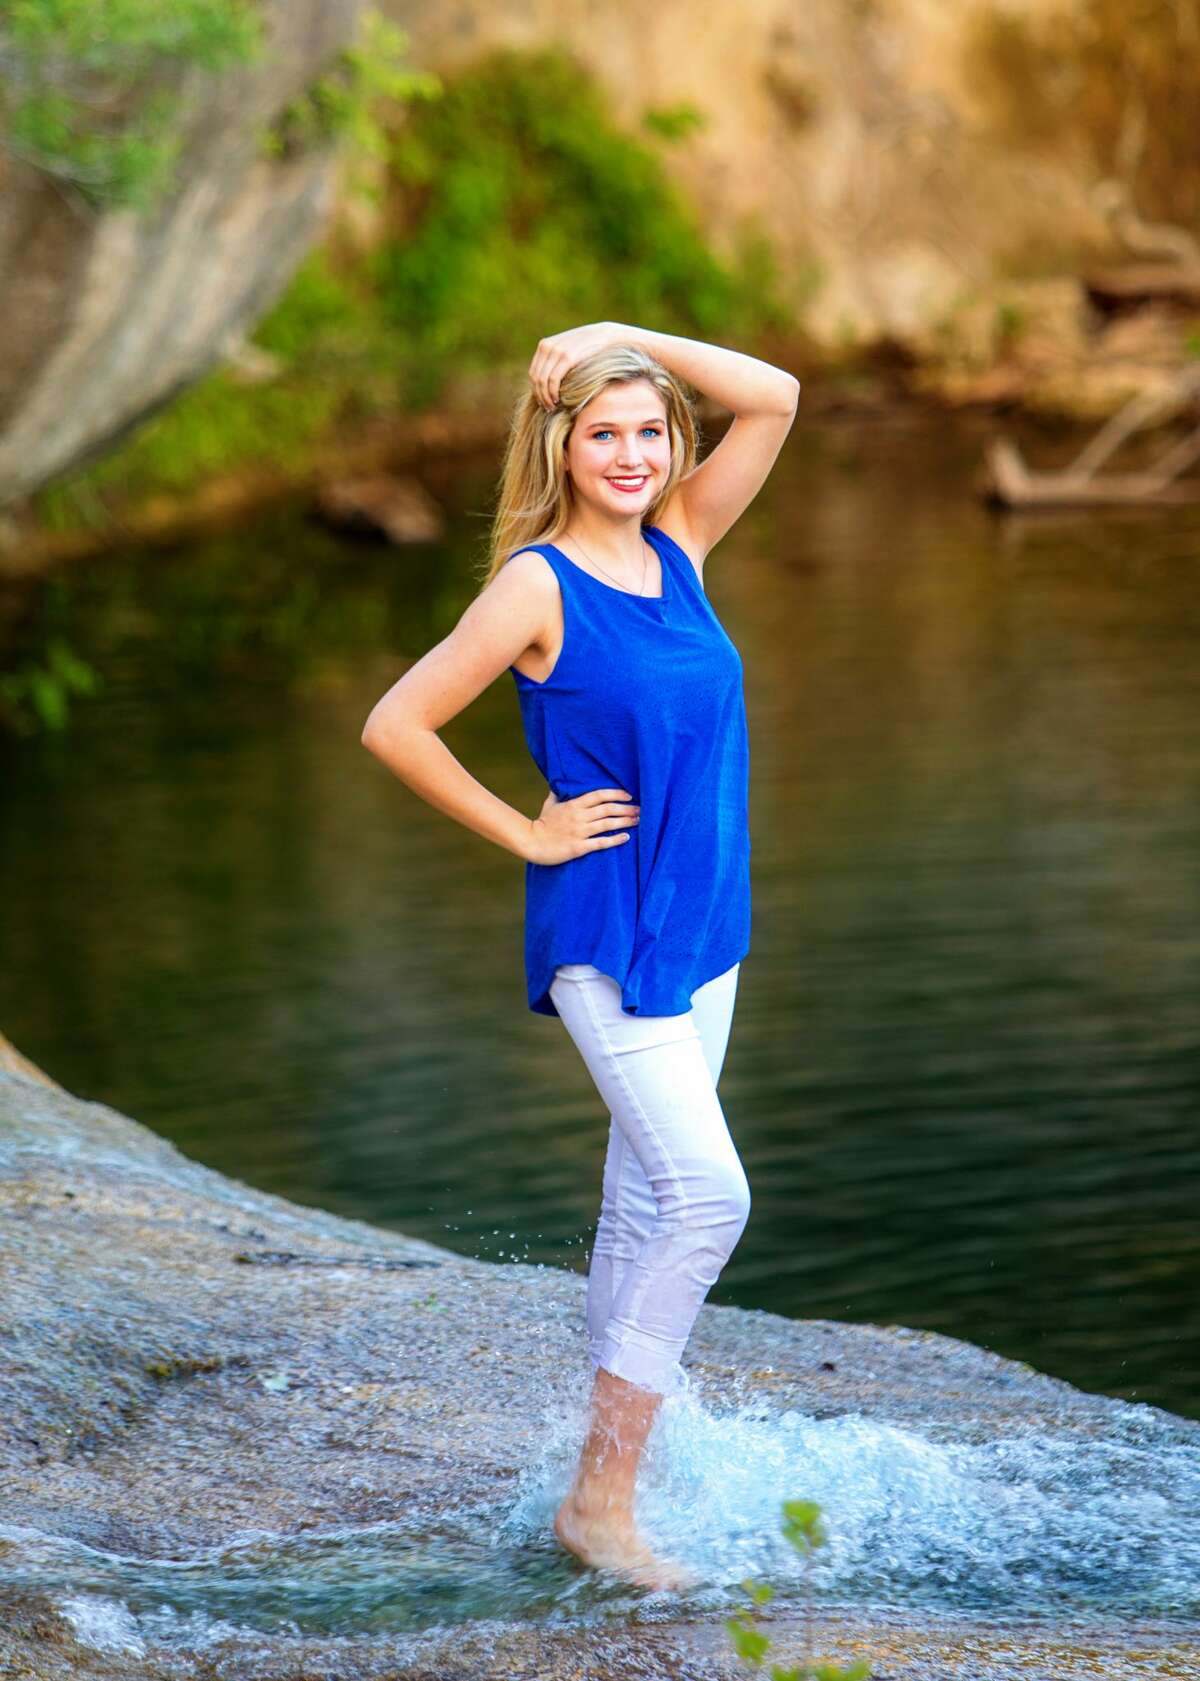 Laura Lee Gunn was taking her senior portraits when she slipped and fell into a river. The result of the epic fail were some hilarious, memorable senior photos.